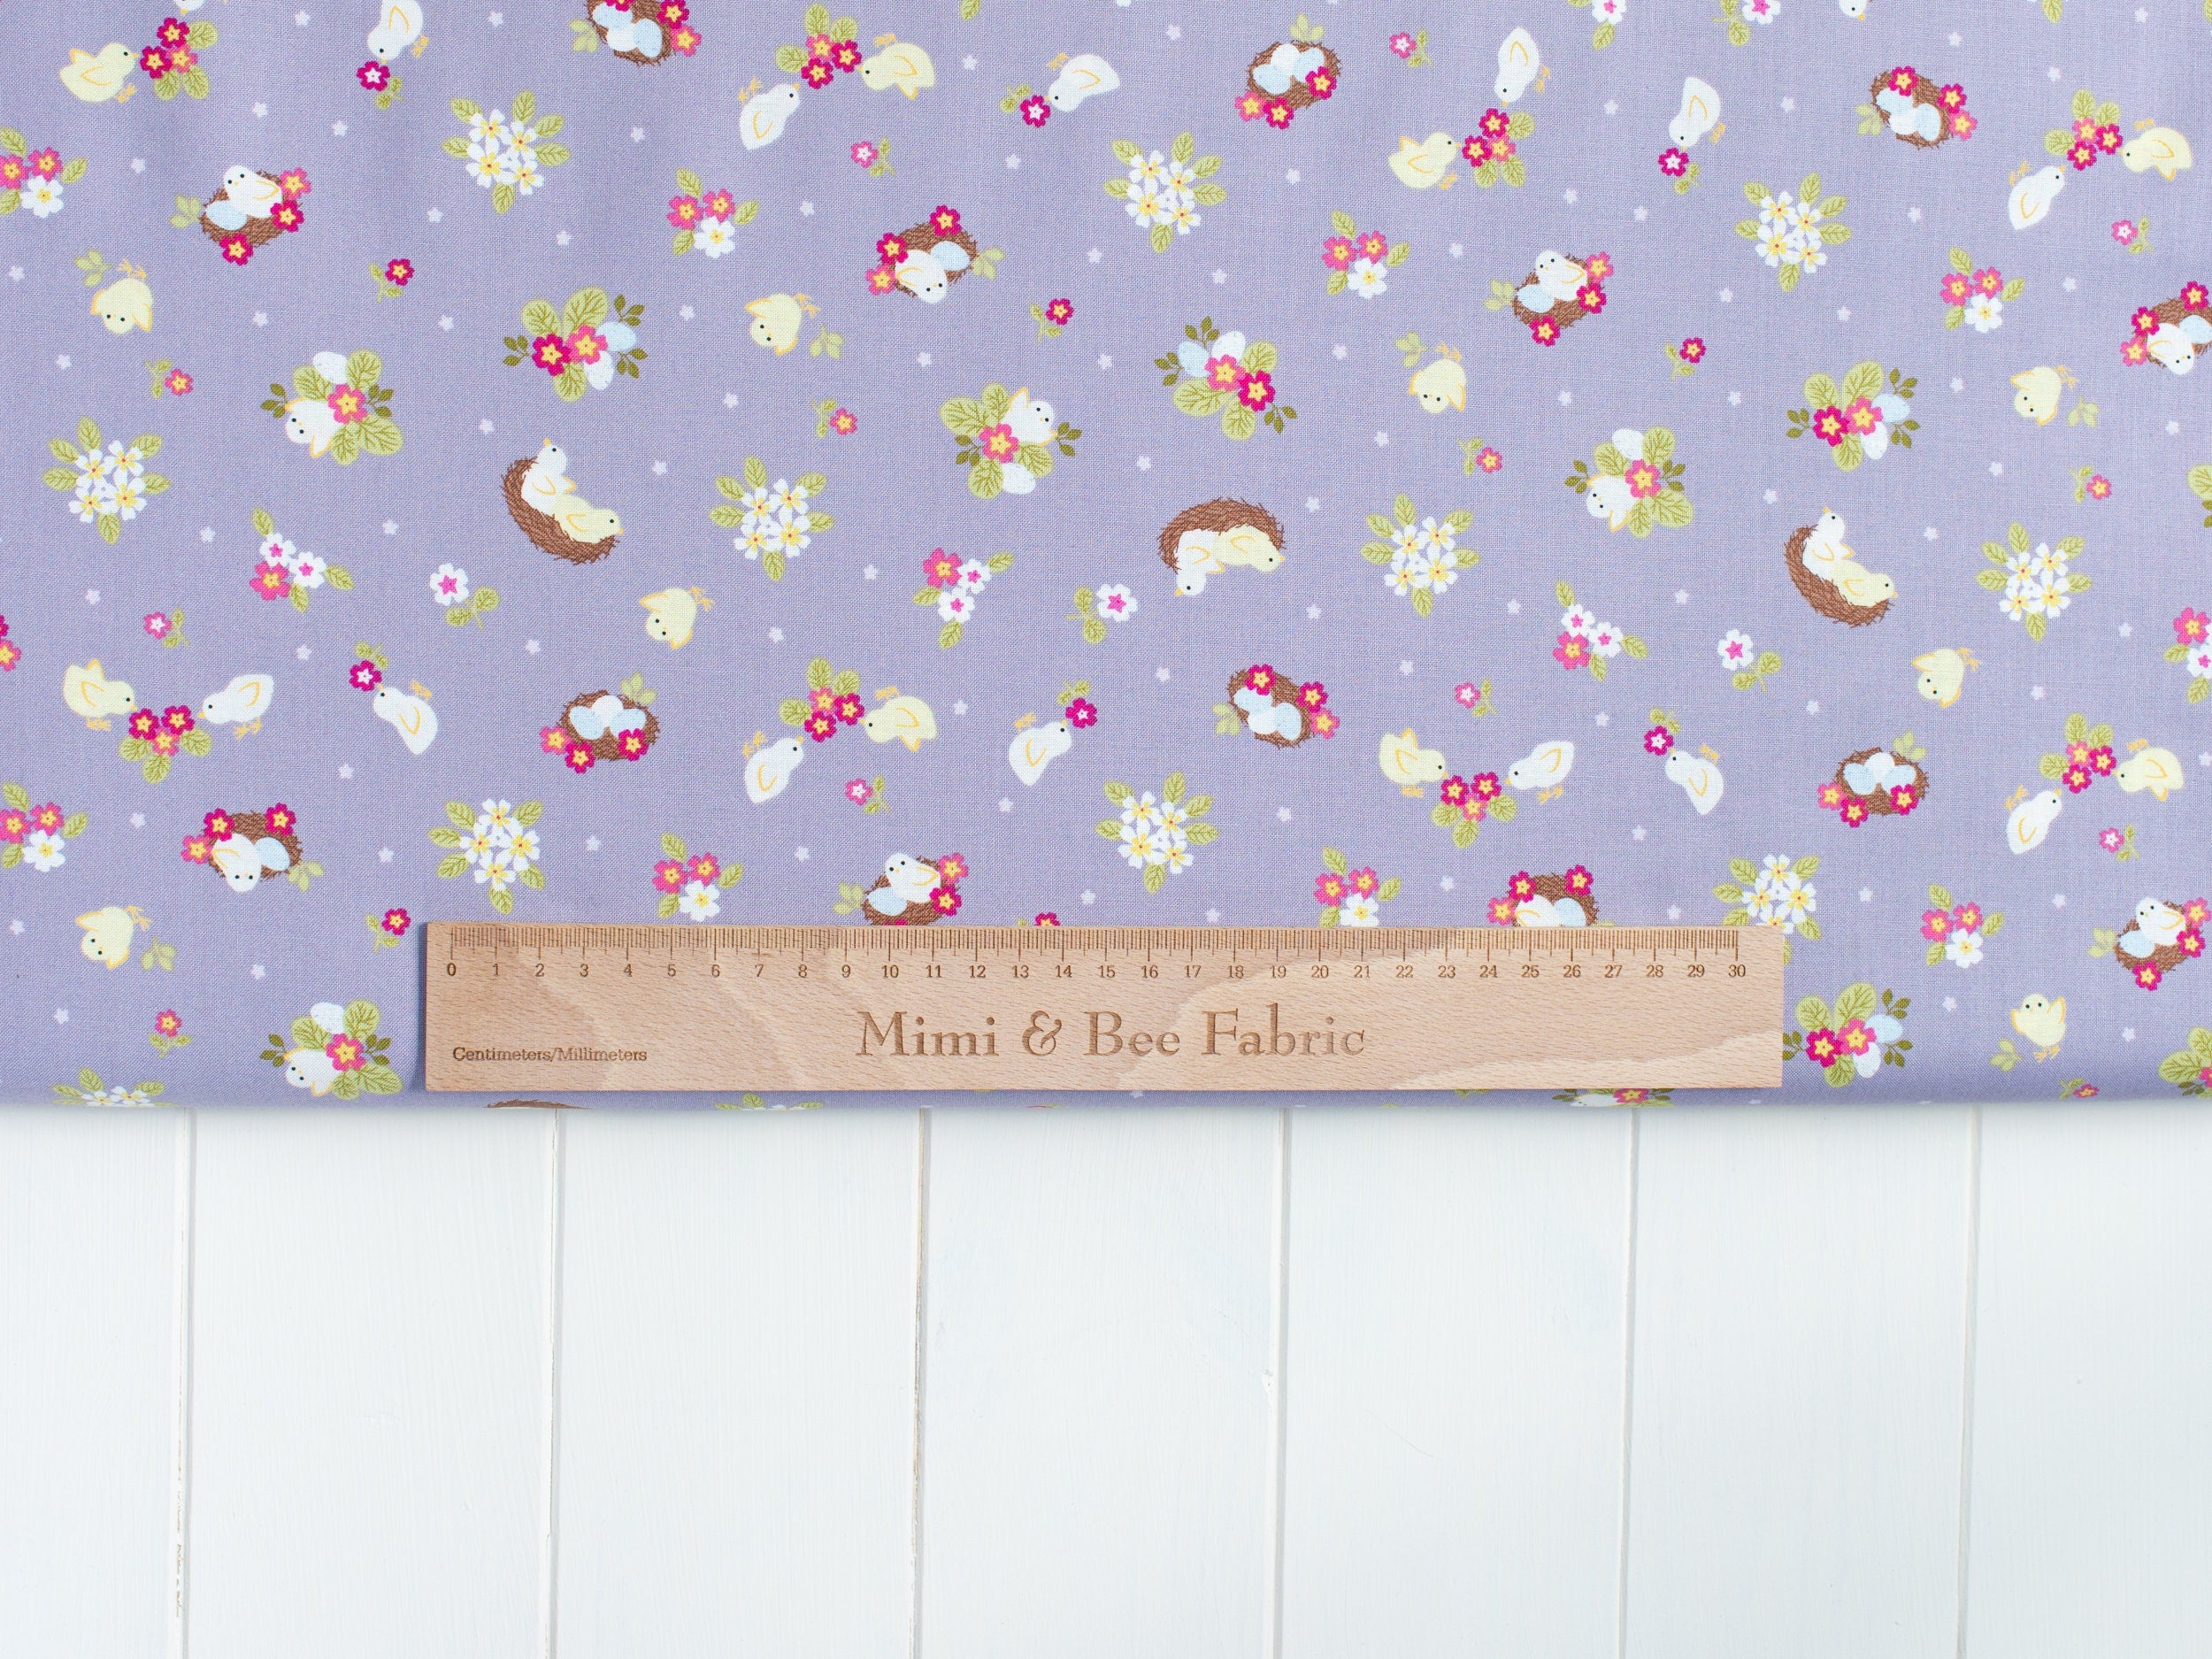 Chicks Nests Eggs and Floral Grey/Purple quilting cotton fabric - Bunny Hop by Lewis & Irene